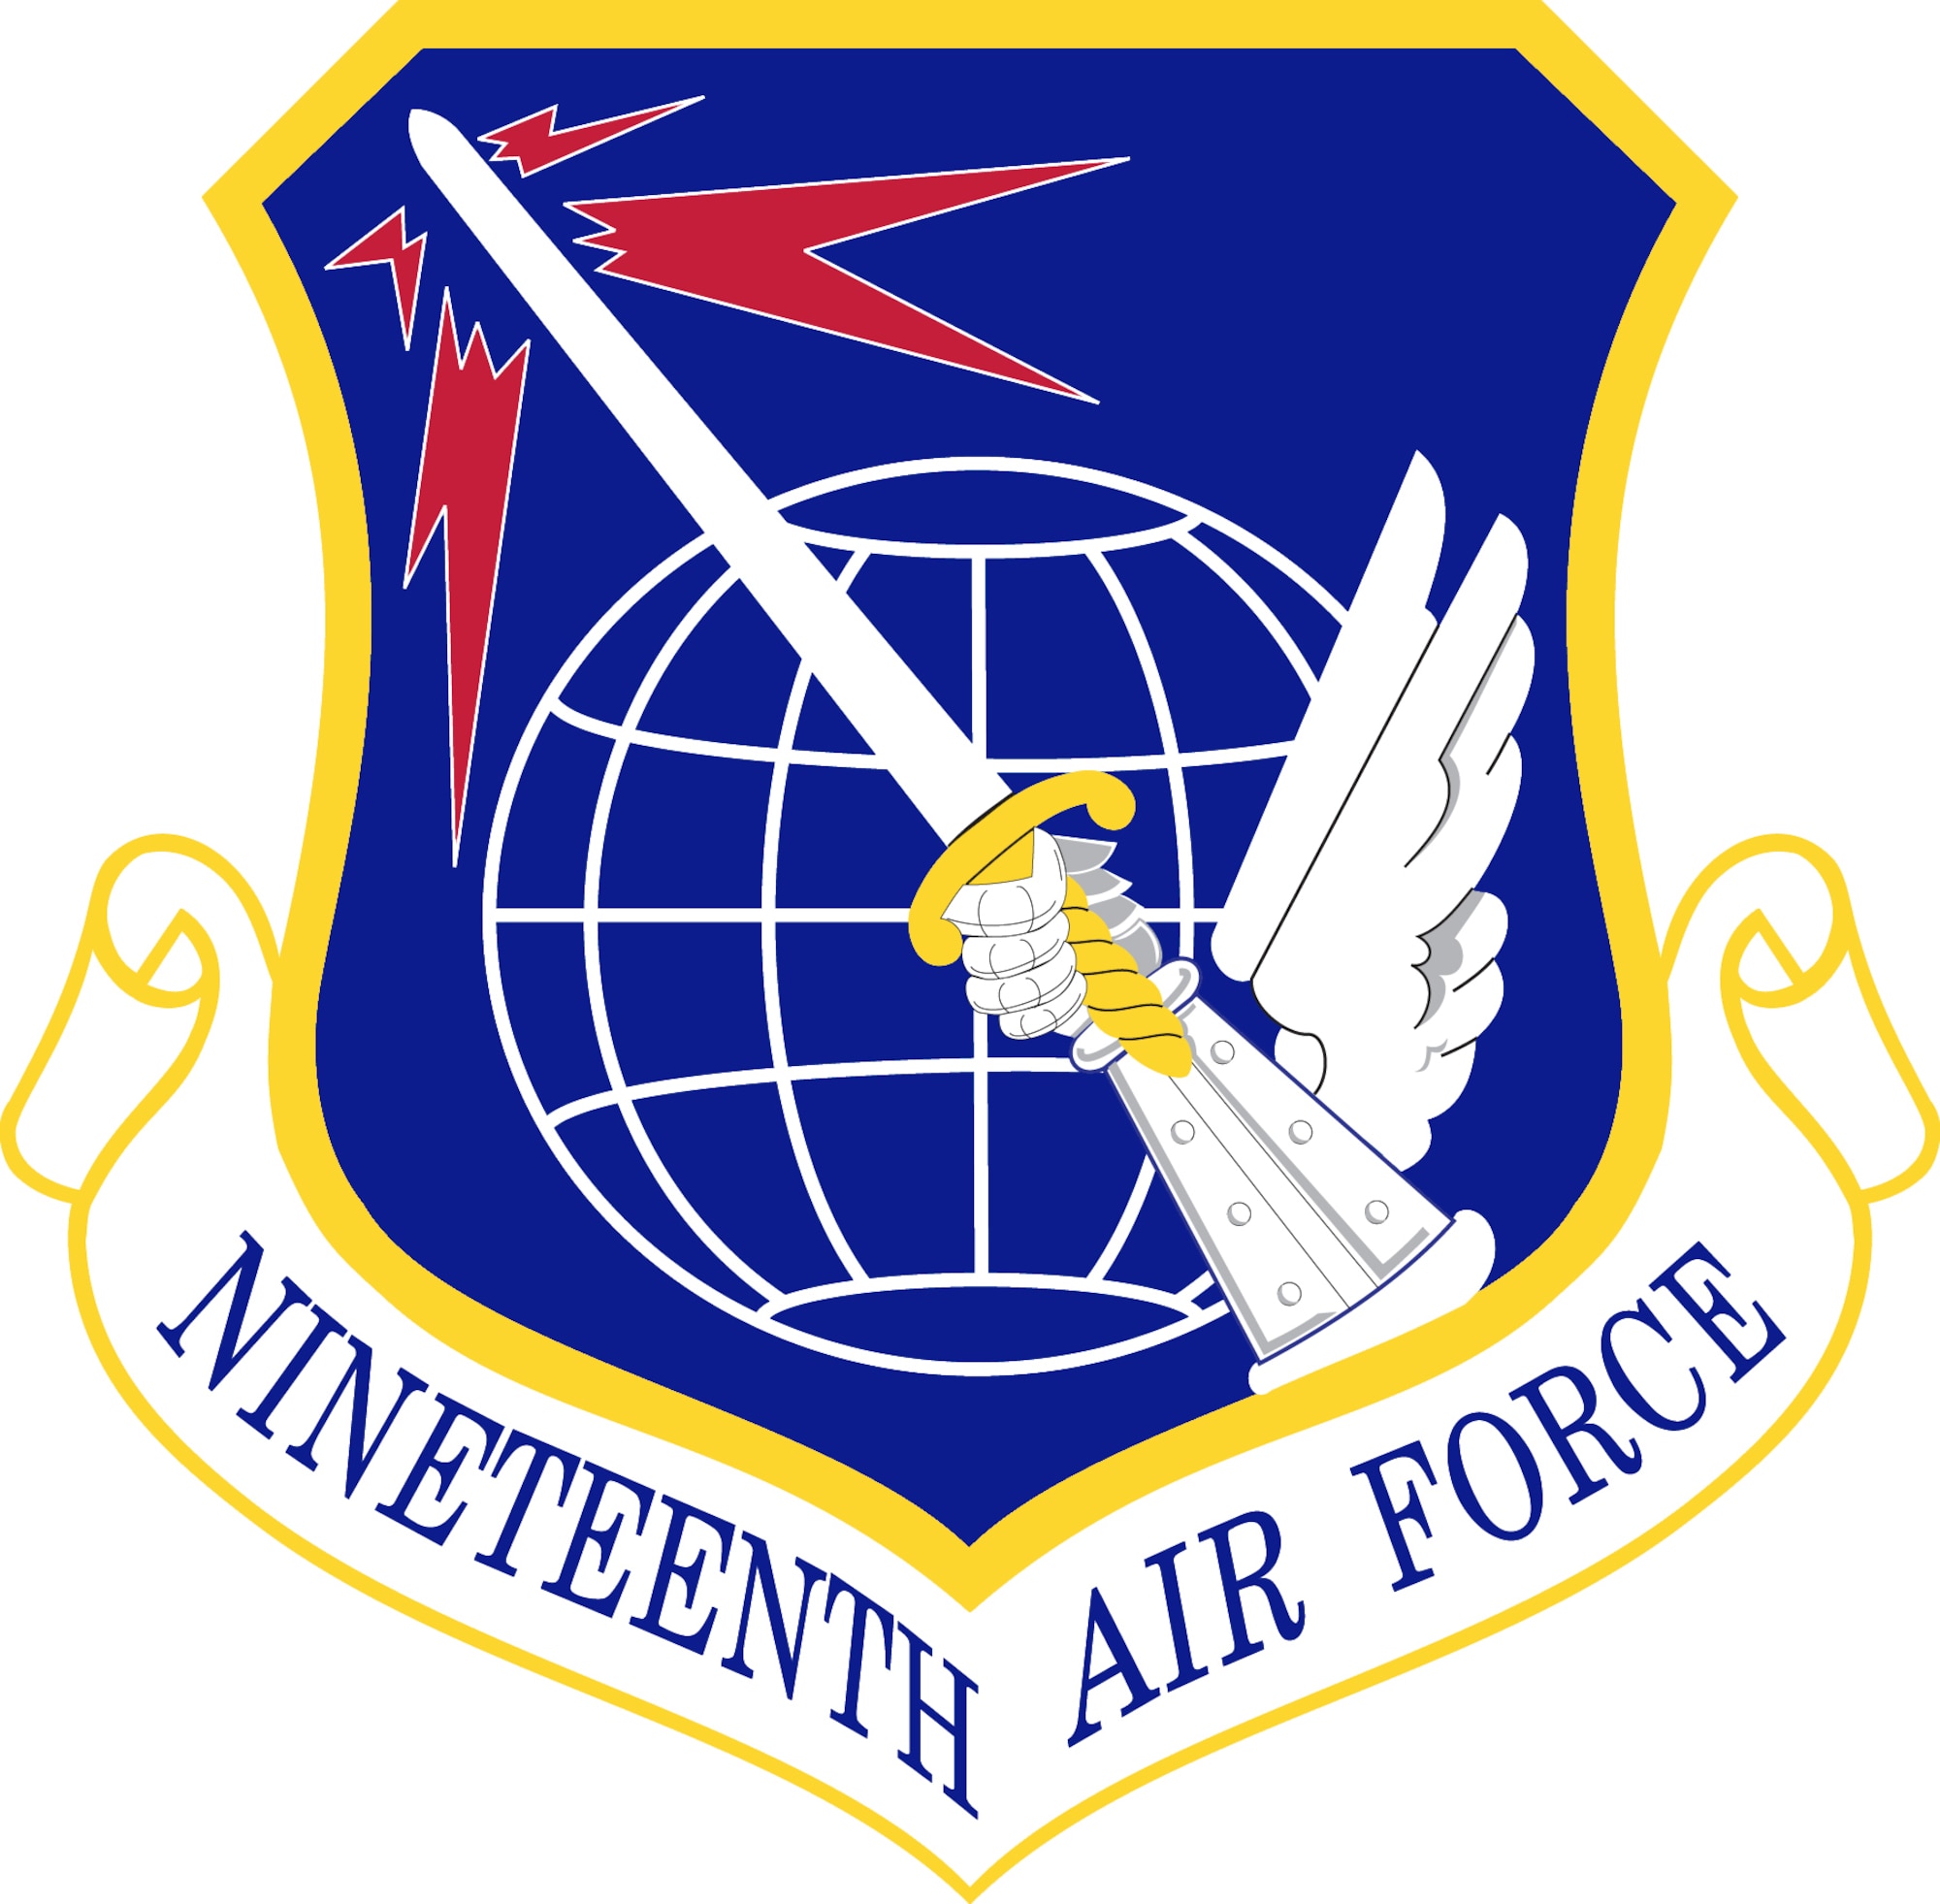 Nineteenth Air Force, headquartered at Joint Base San Antonio-Randolph, Texas, is responsible for the training of aircrews, remotely piloted aircraft crews, air battle managers, weapons directors, Air Force Academy Airmanship programs, and survival, escape, resistance, and evasion specialists to sustain the combat capability of the United States Air Force, other services and our nation's allies.